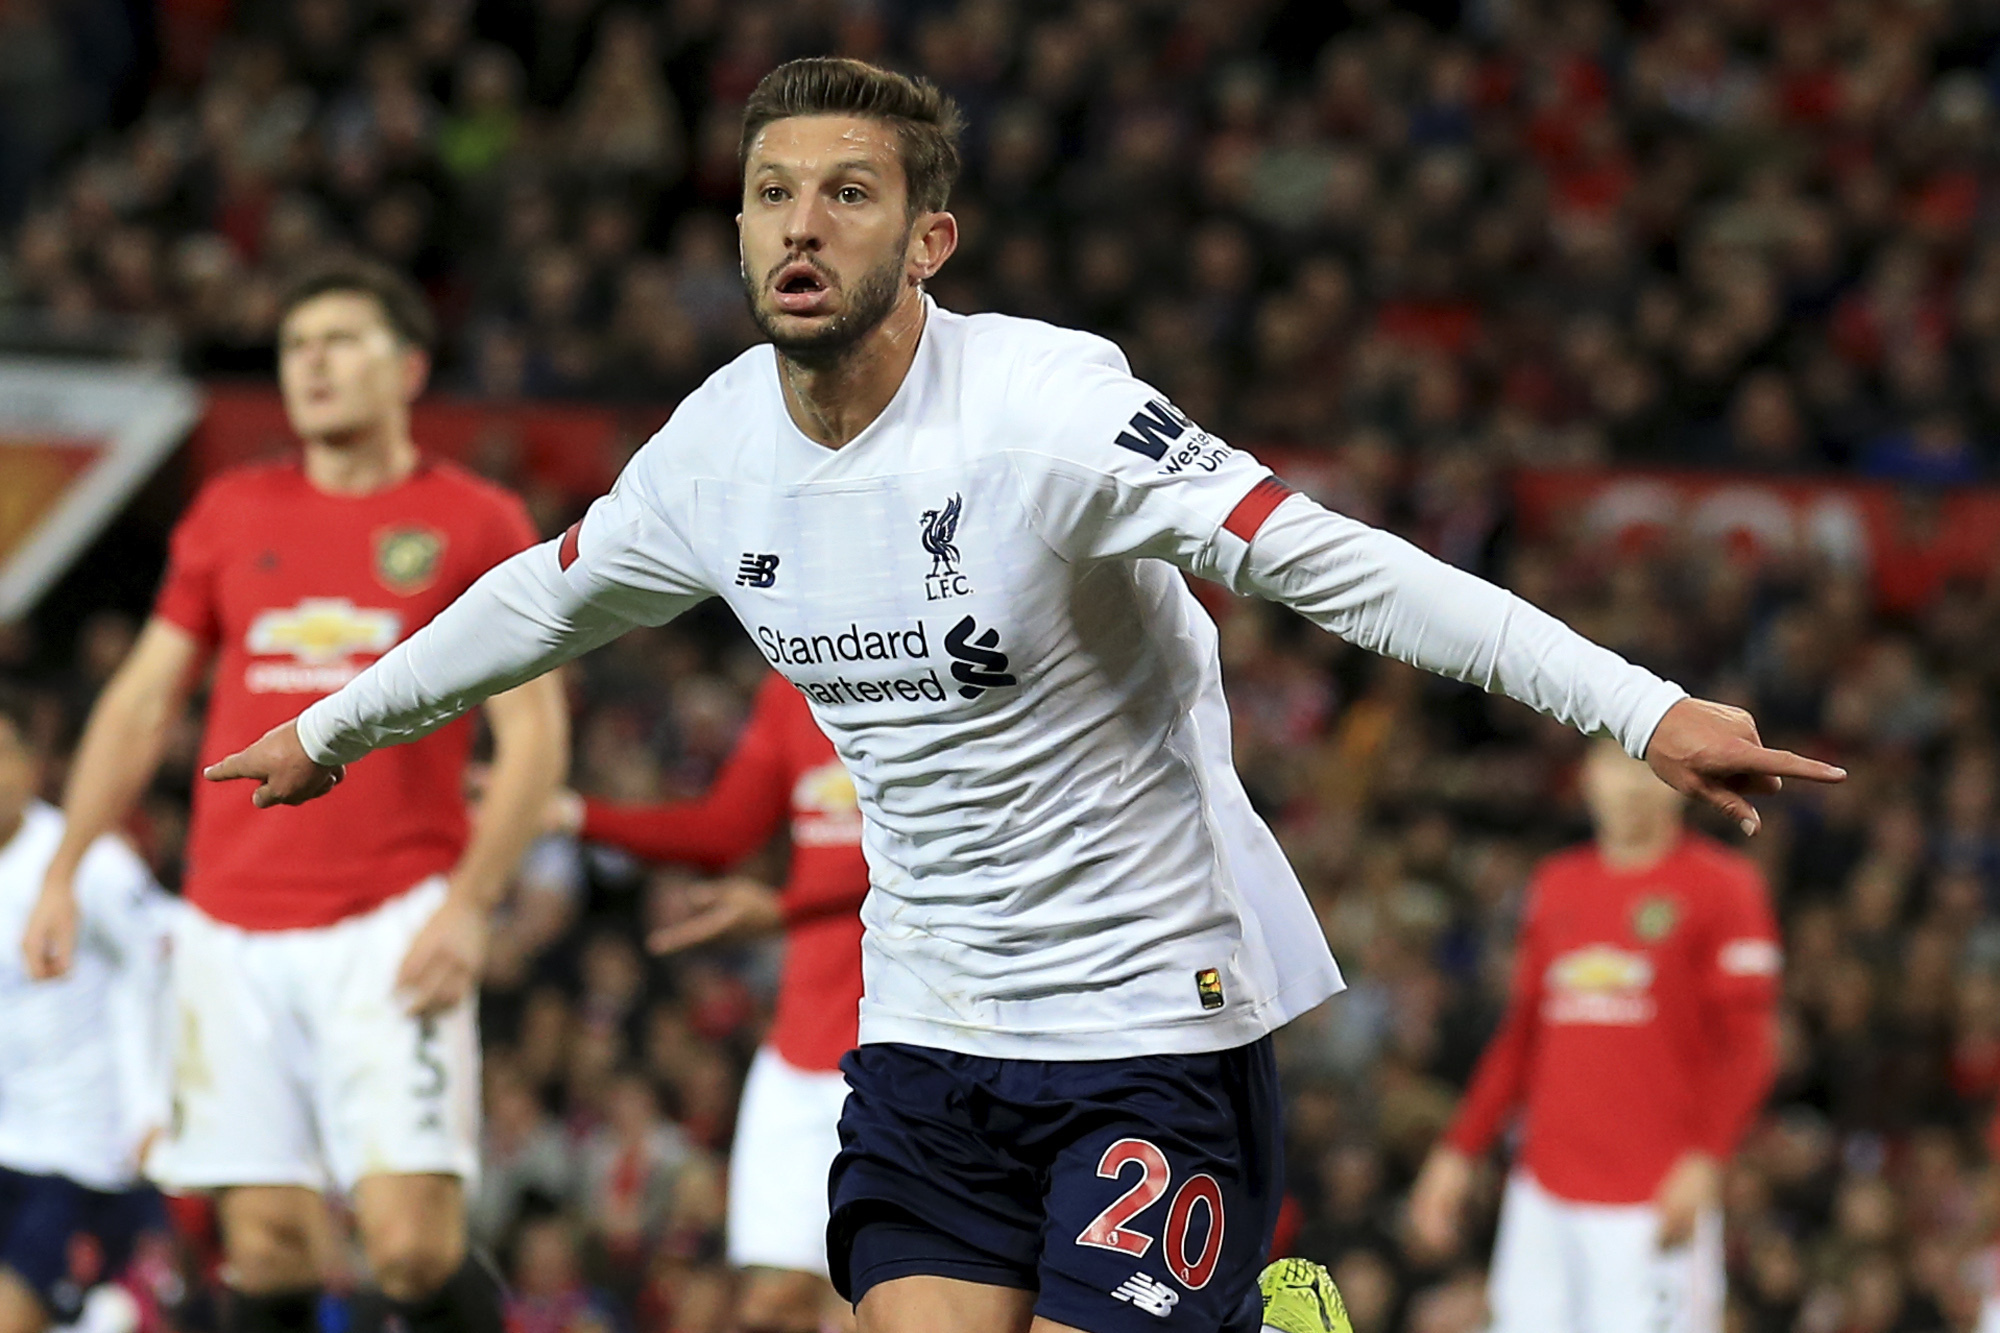 Adam Lallana could play important role against Manchester United